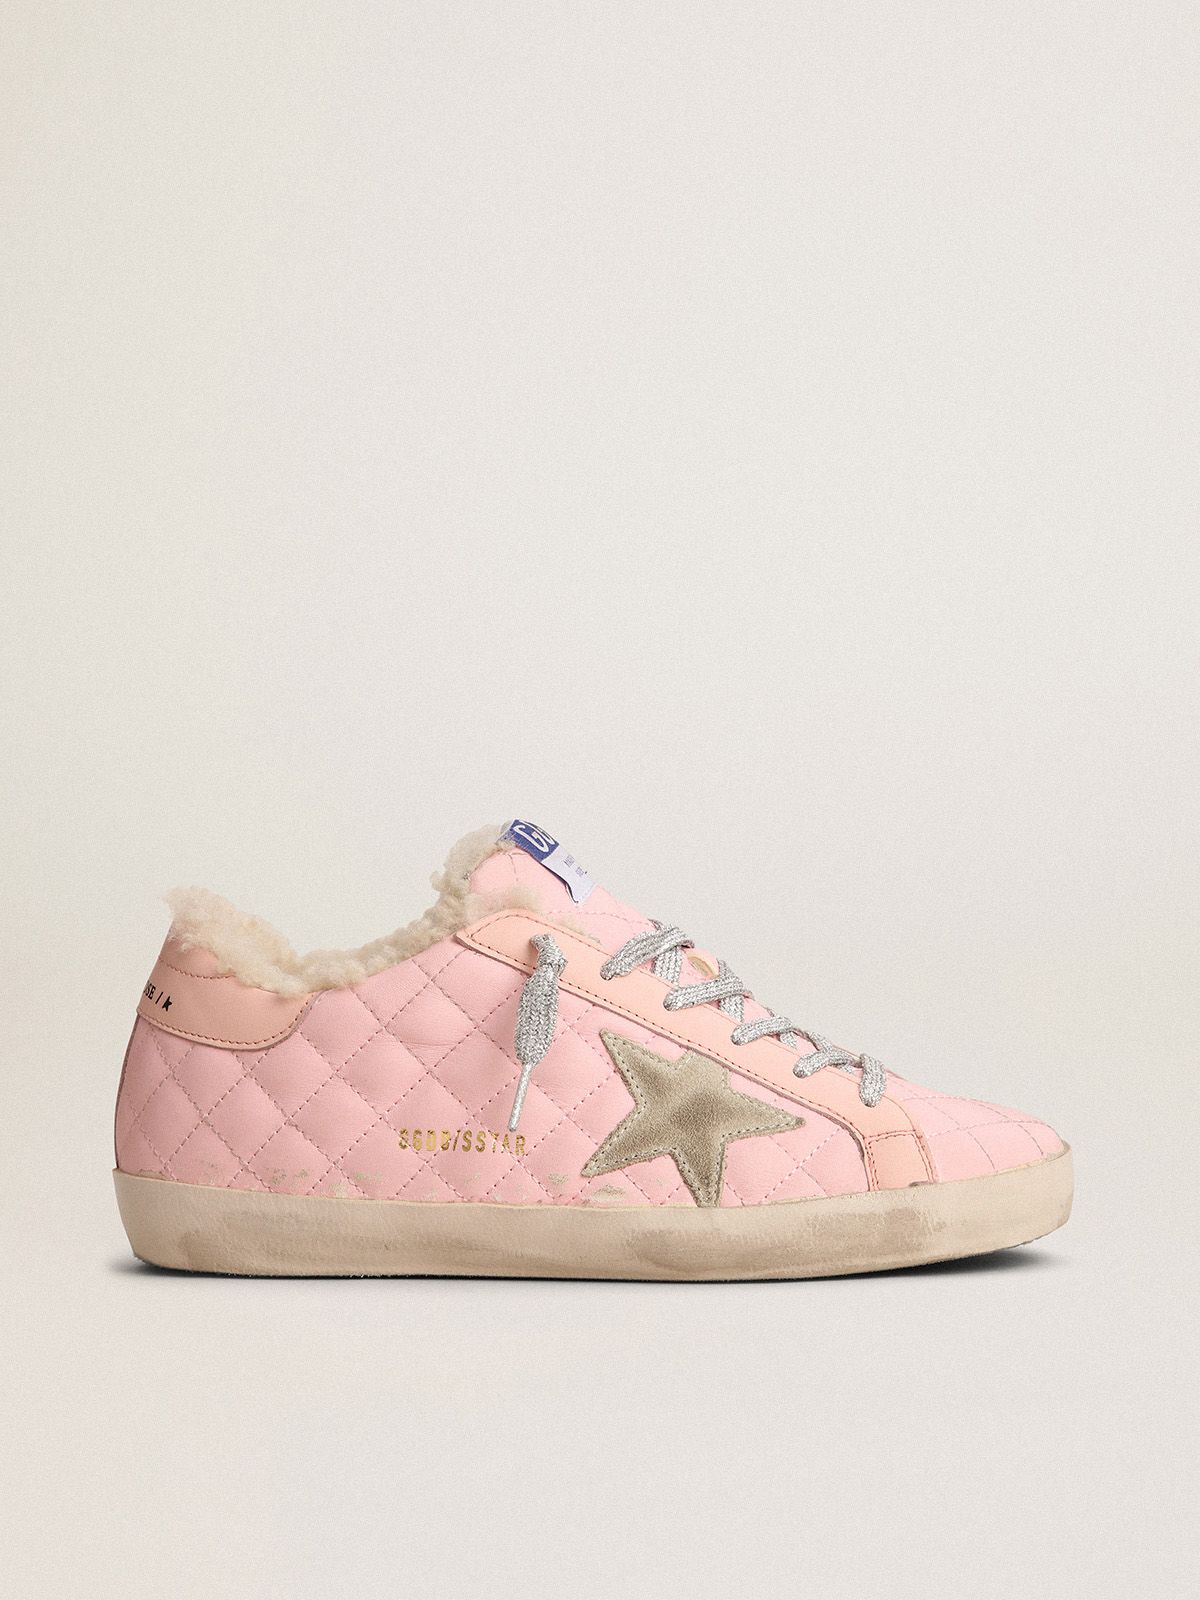 golden goose sneakers leather with pink in shearling lining quilted Super-Star